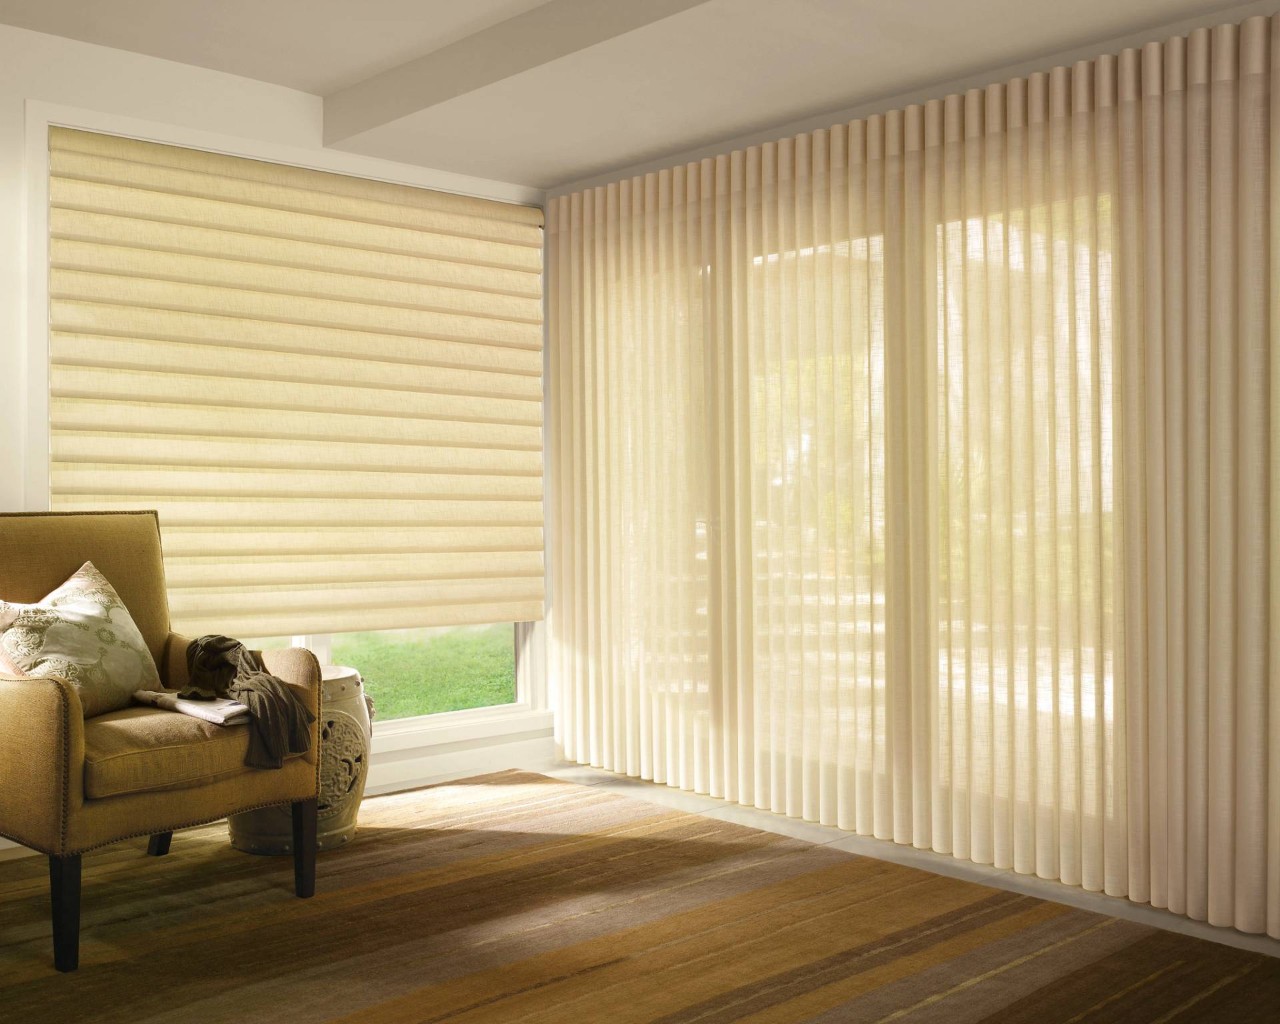 Vignette® Modern Roman Shades blocking light in a well-appointed room near Johnson City, TN